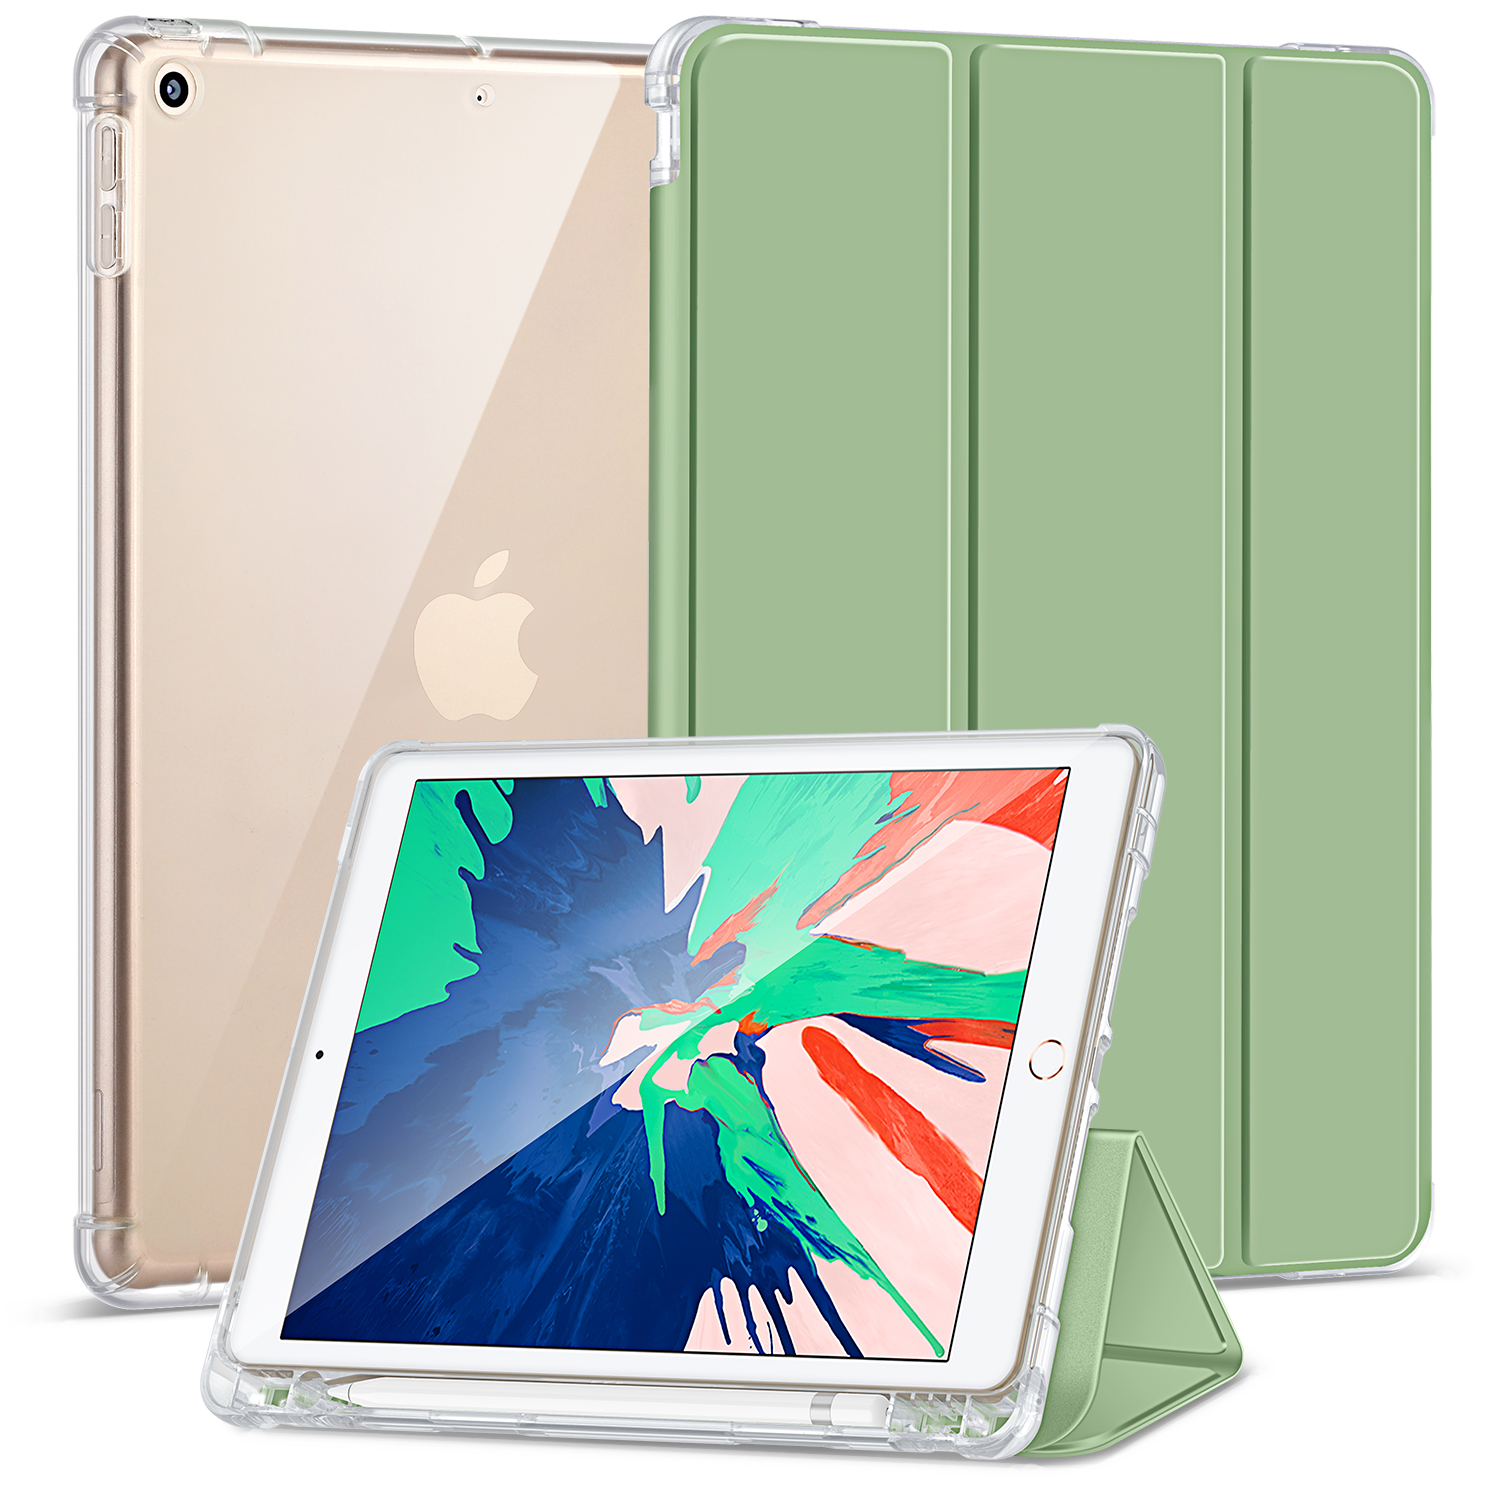 Clear TPU Skin Protection Anti Slip Lightweight Cover for iPad 2022